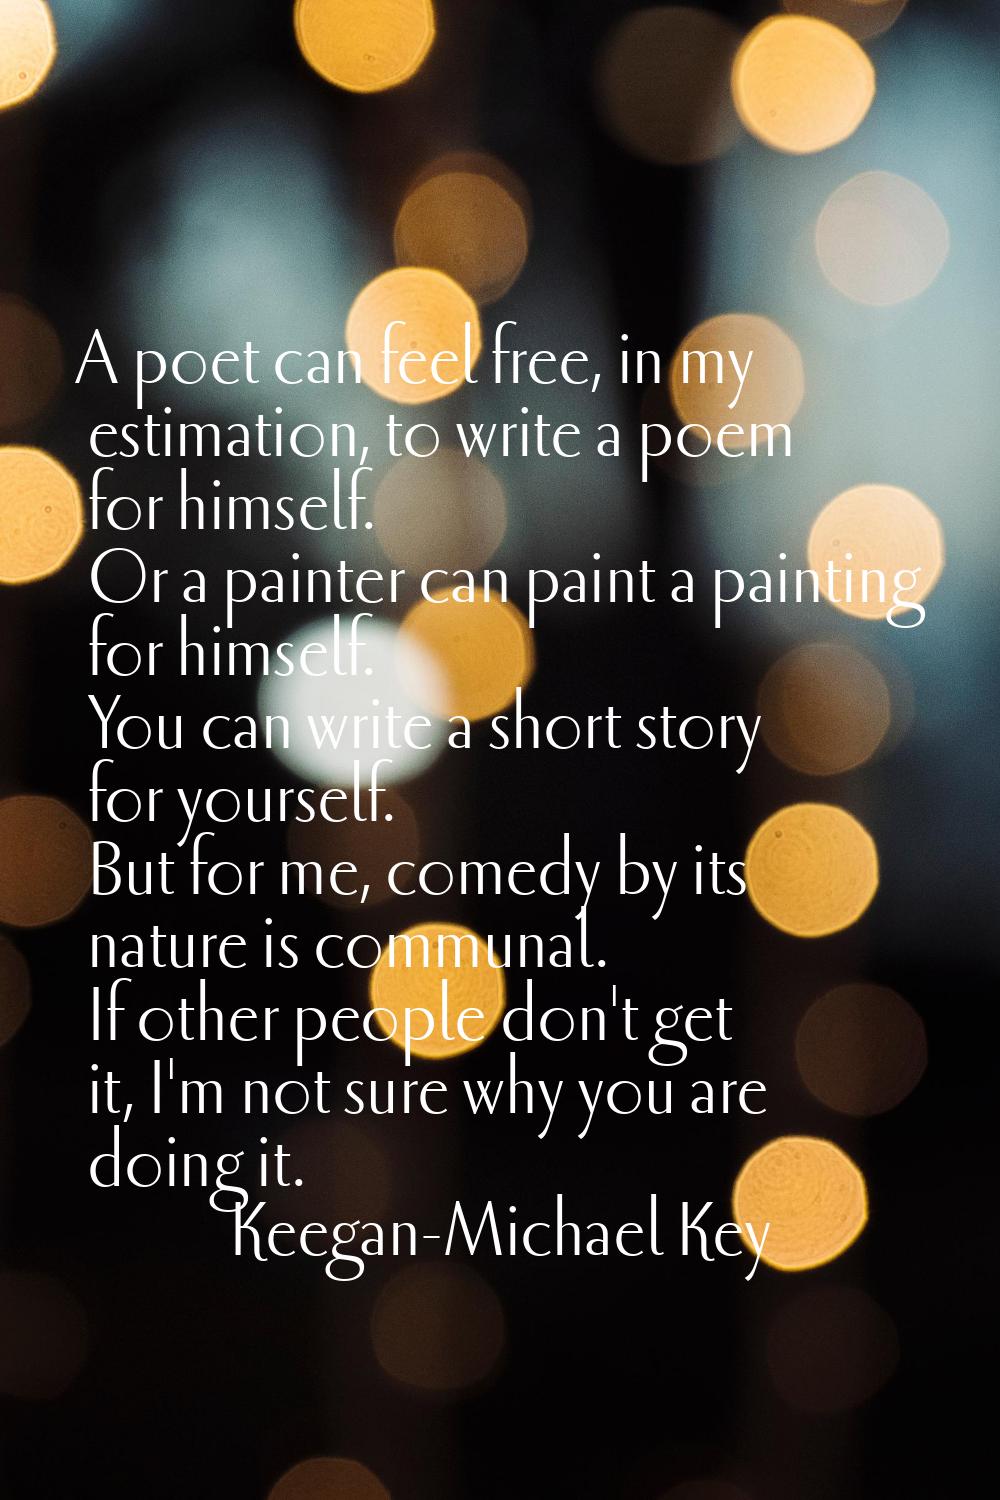 A poet can feel free, in my estimation, to write a poem for himself. Or a painter can paint a paint